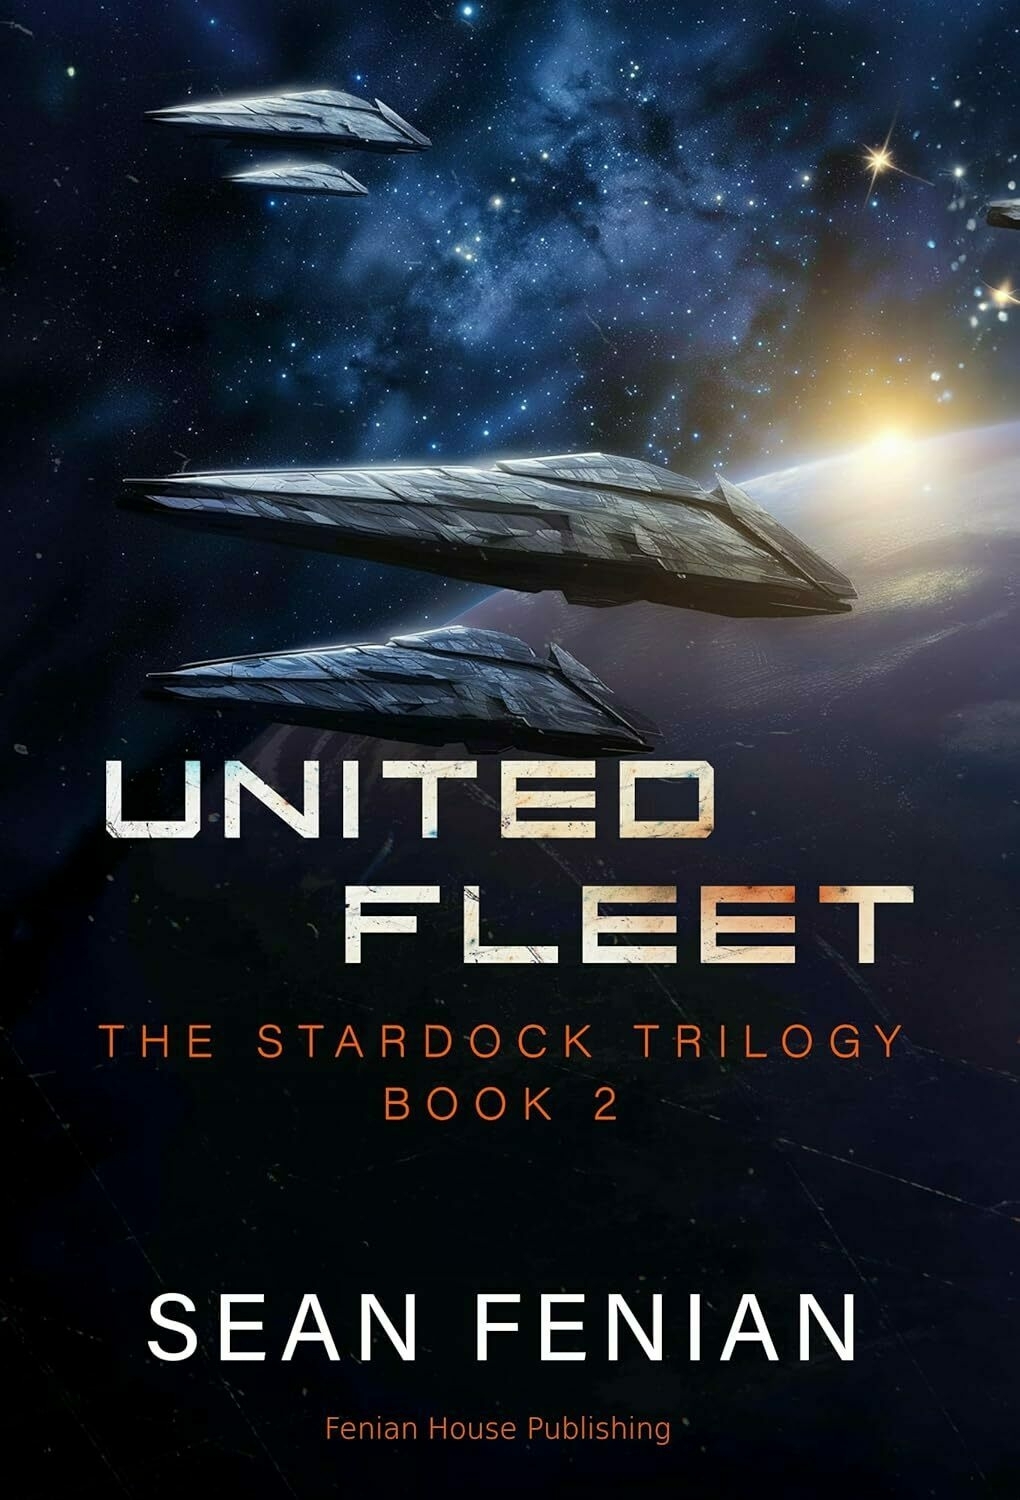 Spaceships glide through space with a nebula and stars in the background. Text: 'UNITED FLEET THE STARDOCK TRILOGY BOOK 2 SEAN FENIAN Fenian House Publishing'